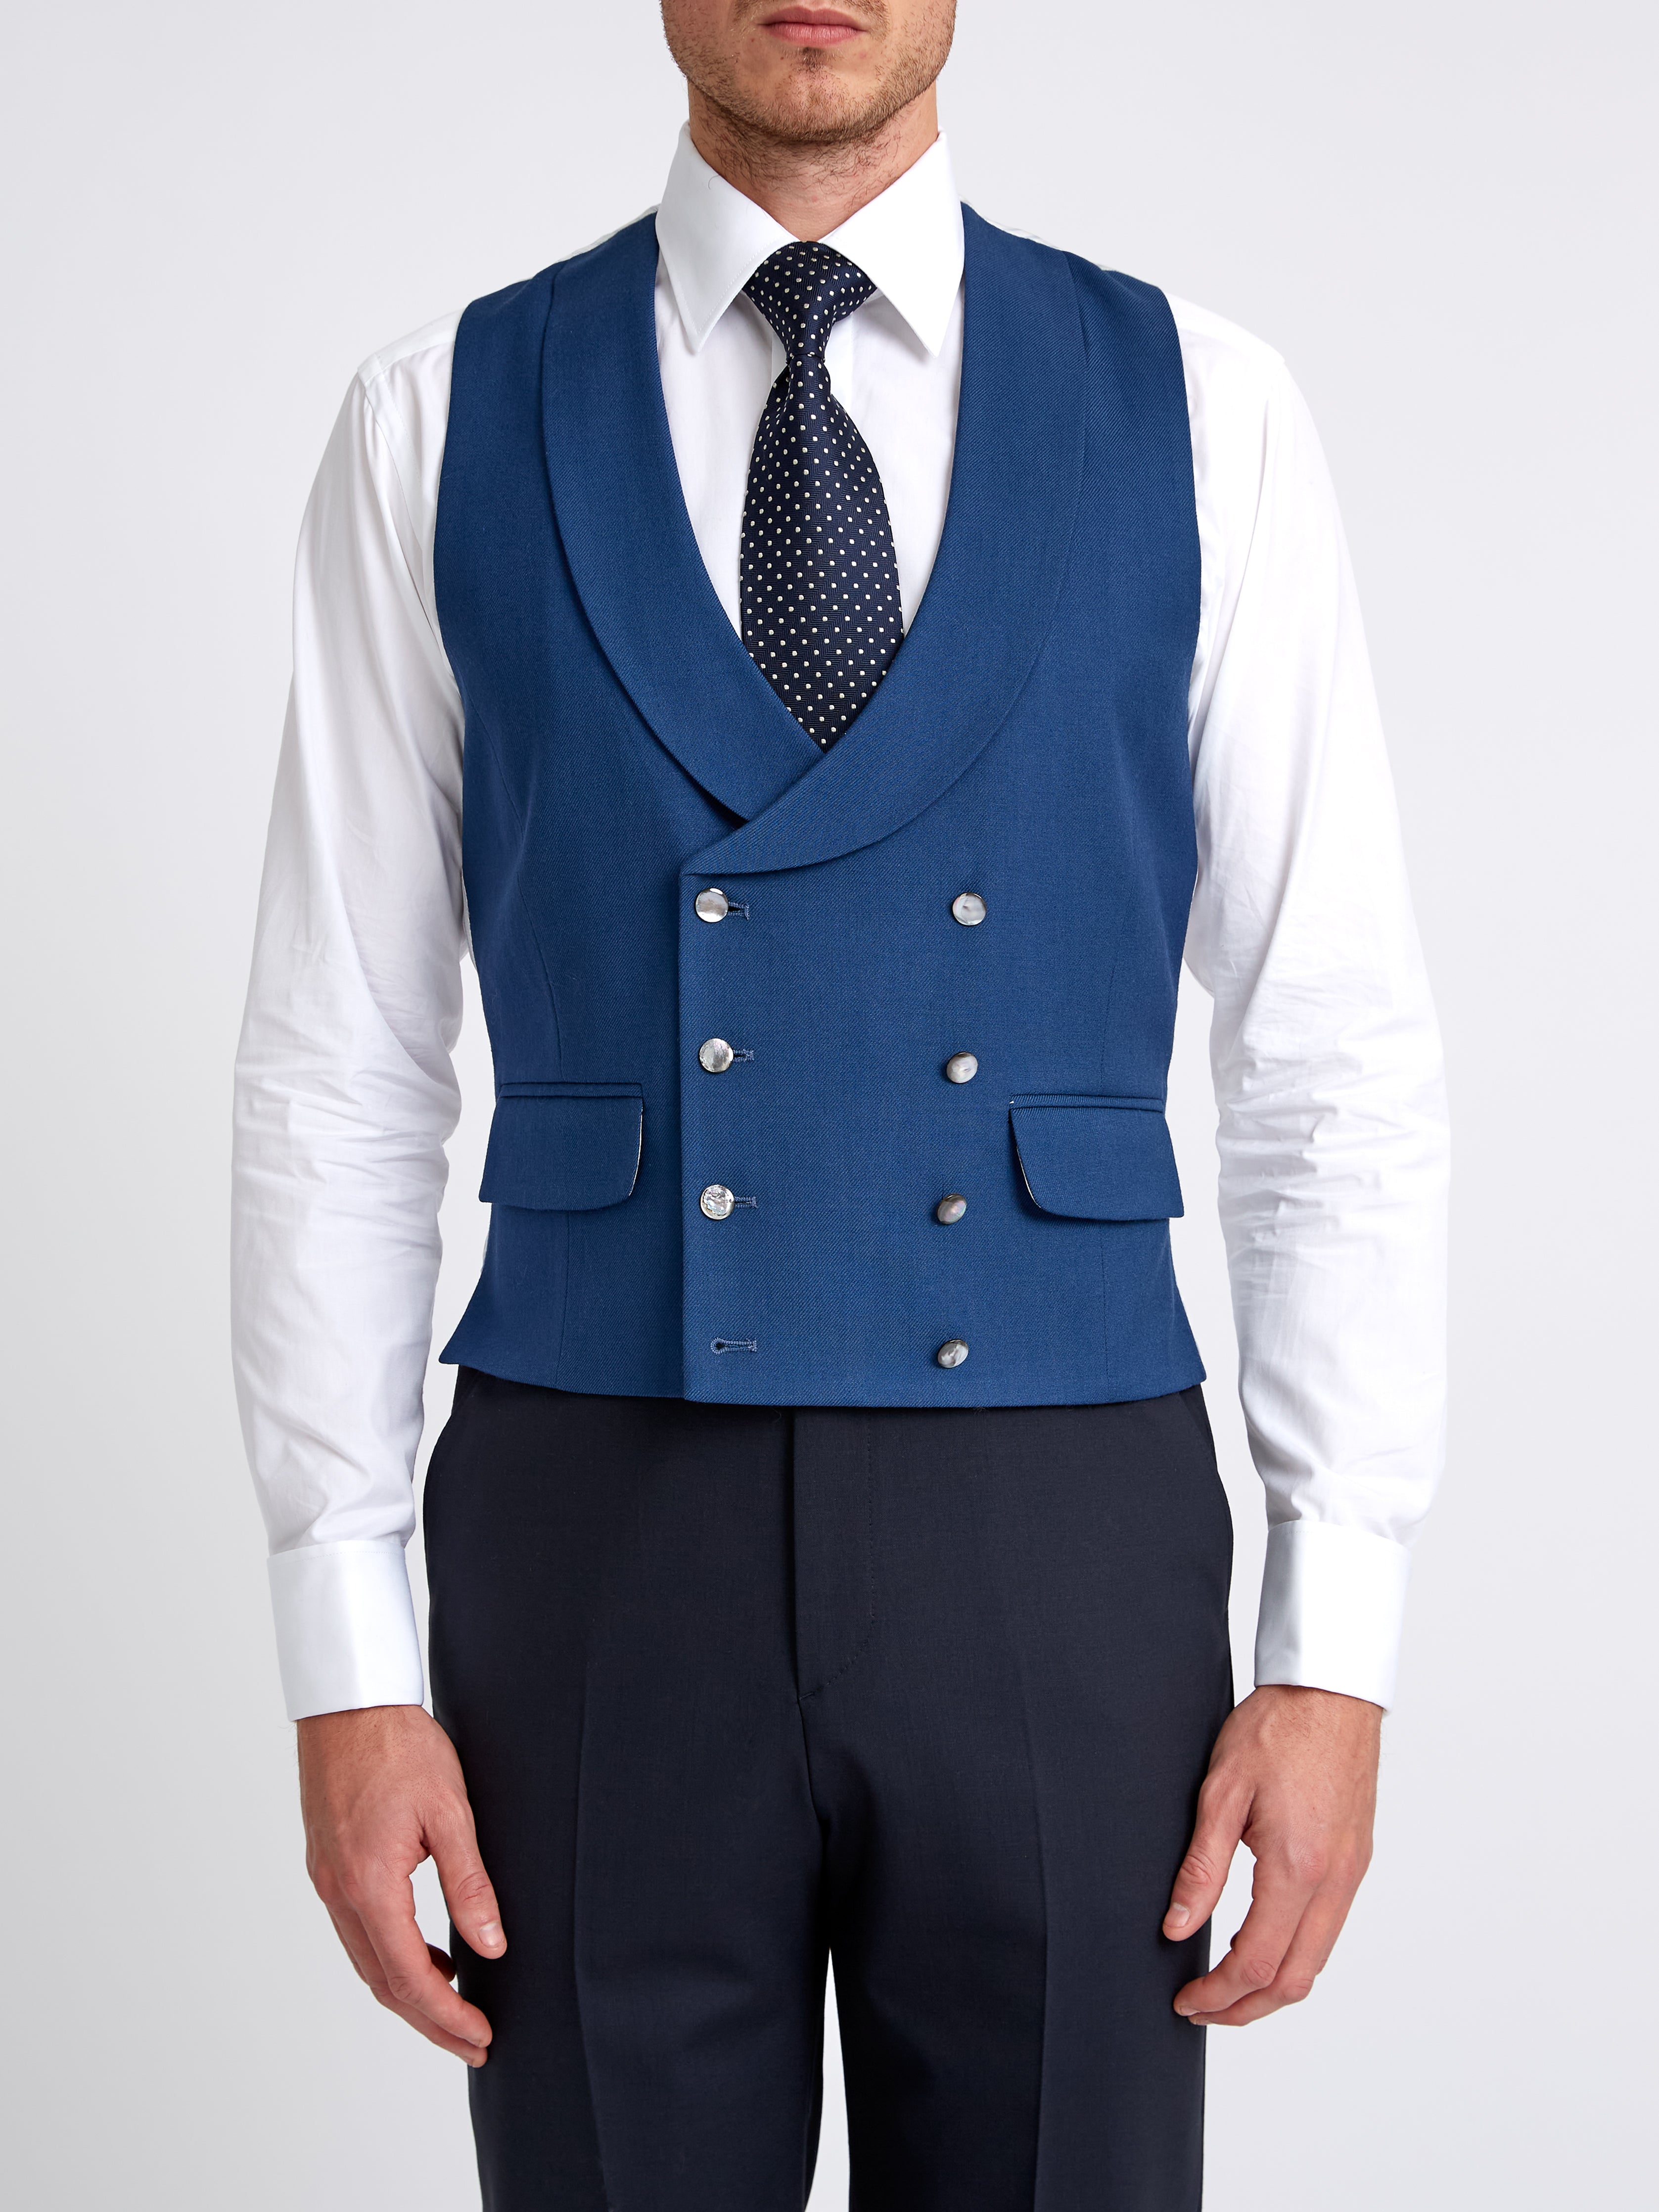 Storm Blue Wool Double Breasted 8 Button Shawl Lapel Waistcoat